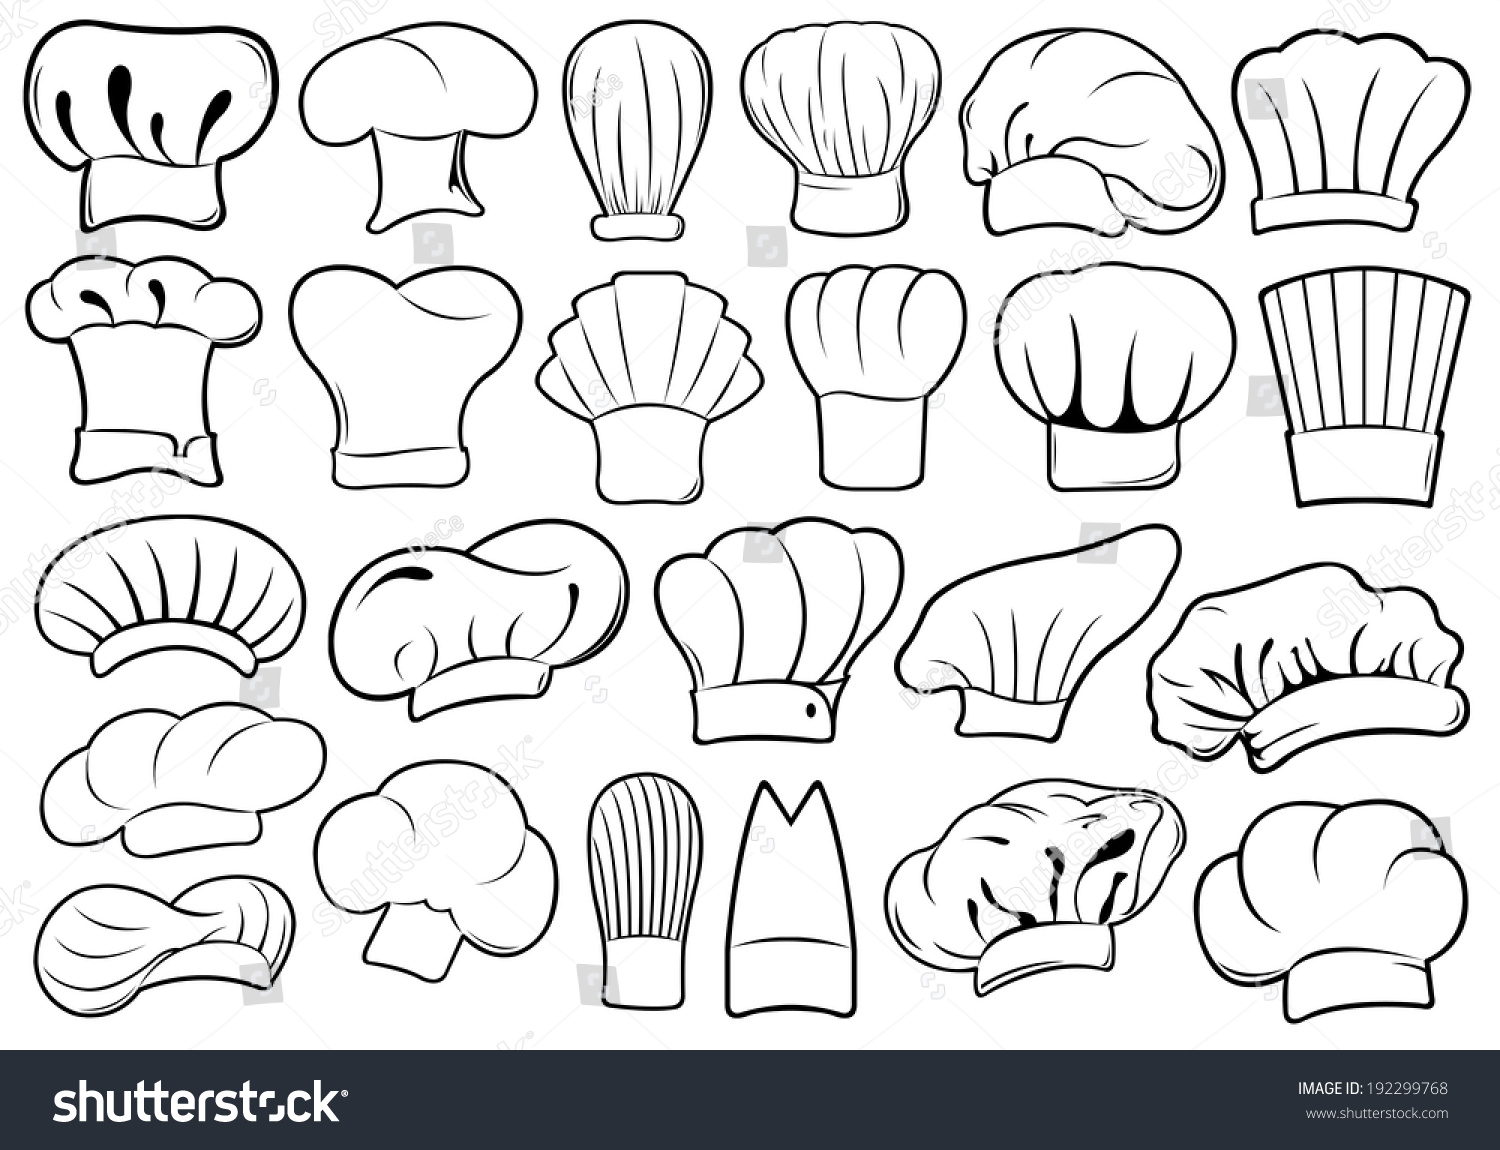 Set Of Different Chef Hats Stock Vector Illustration 192299768